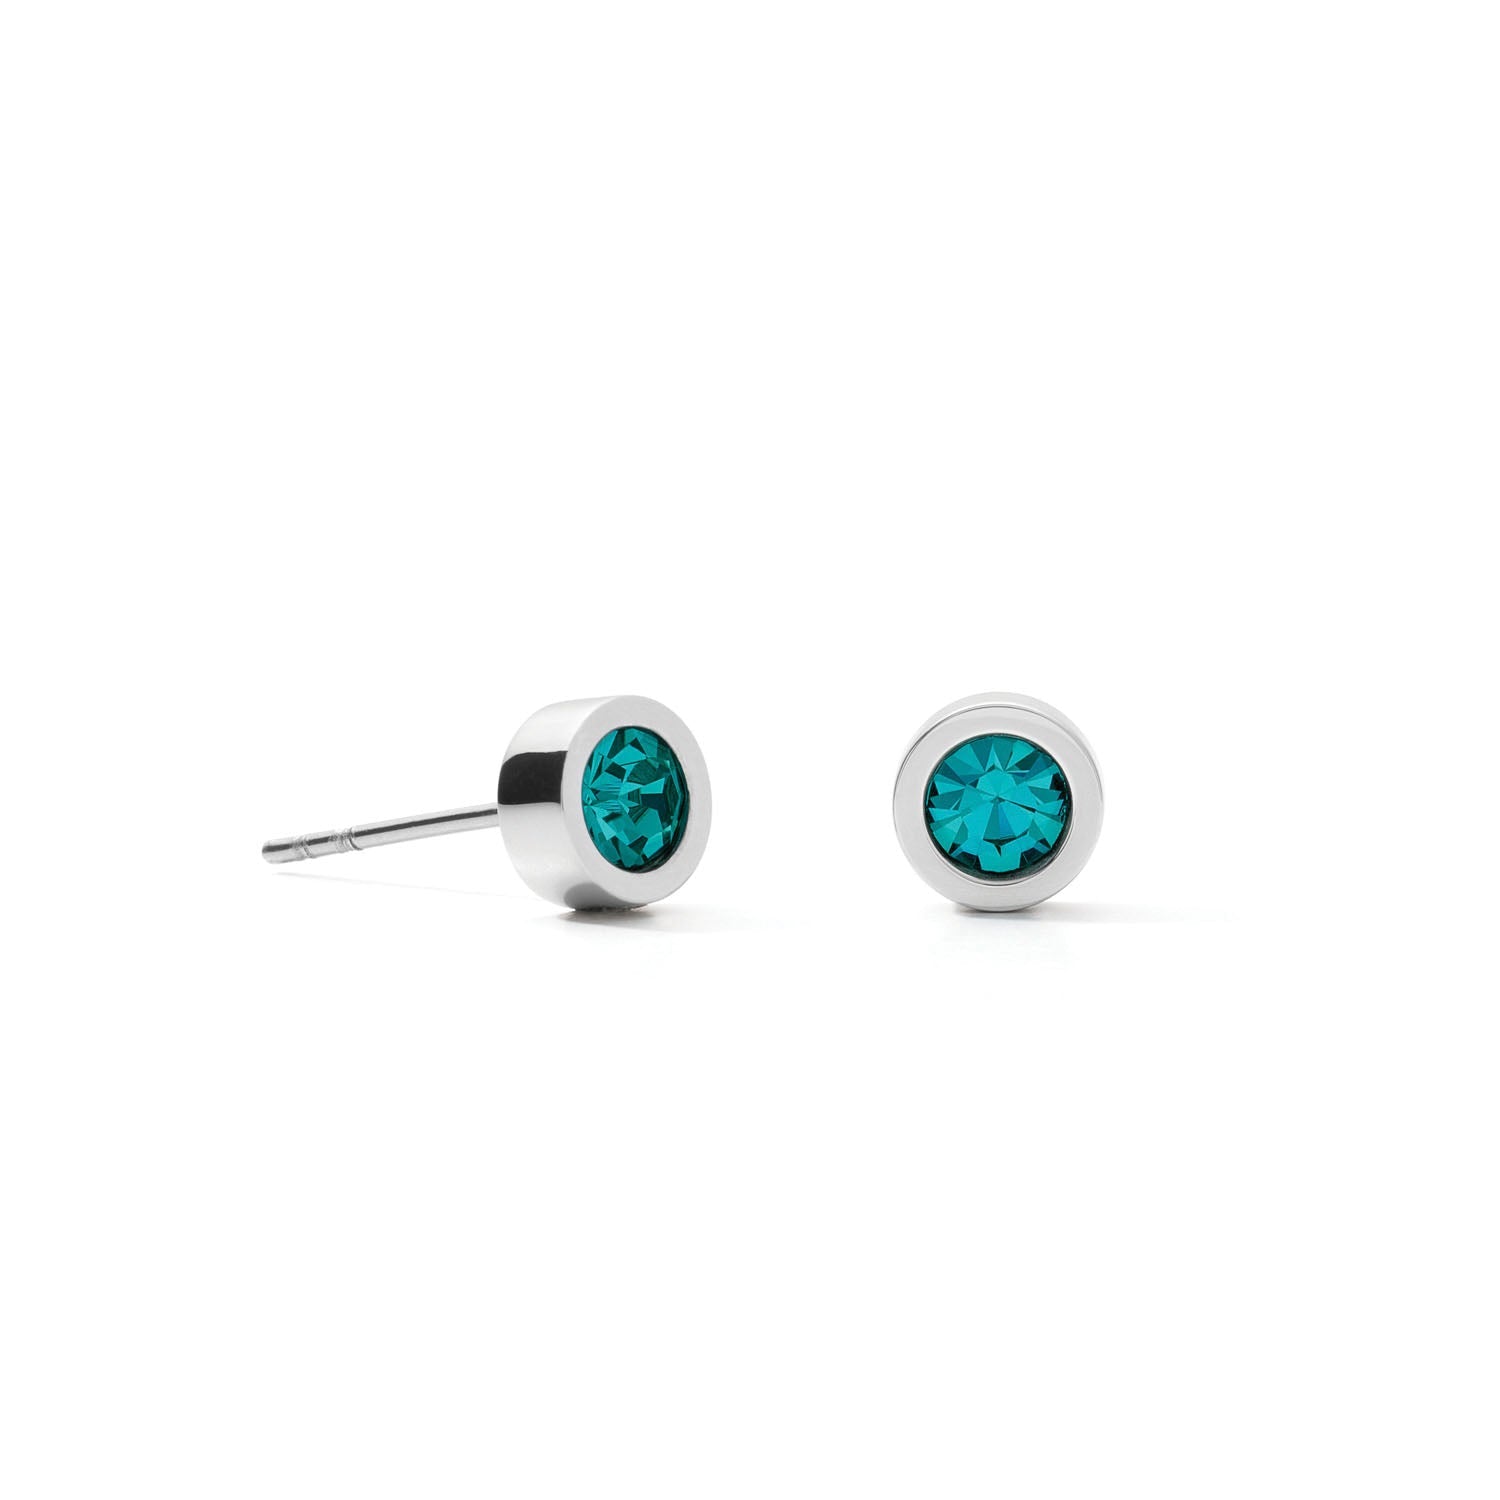 Stud Earrings with Crystals 0228/21_0547 - Turquoise